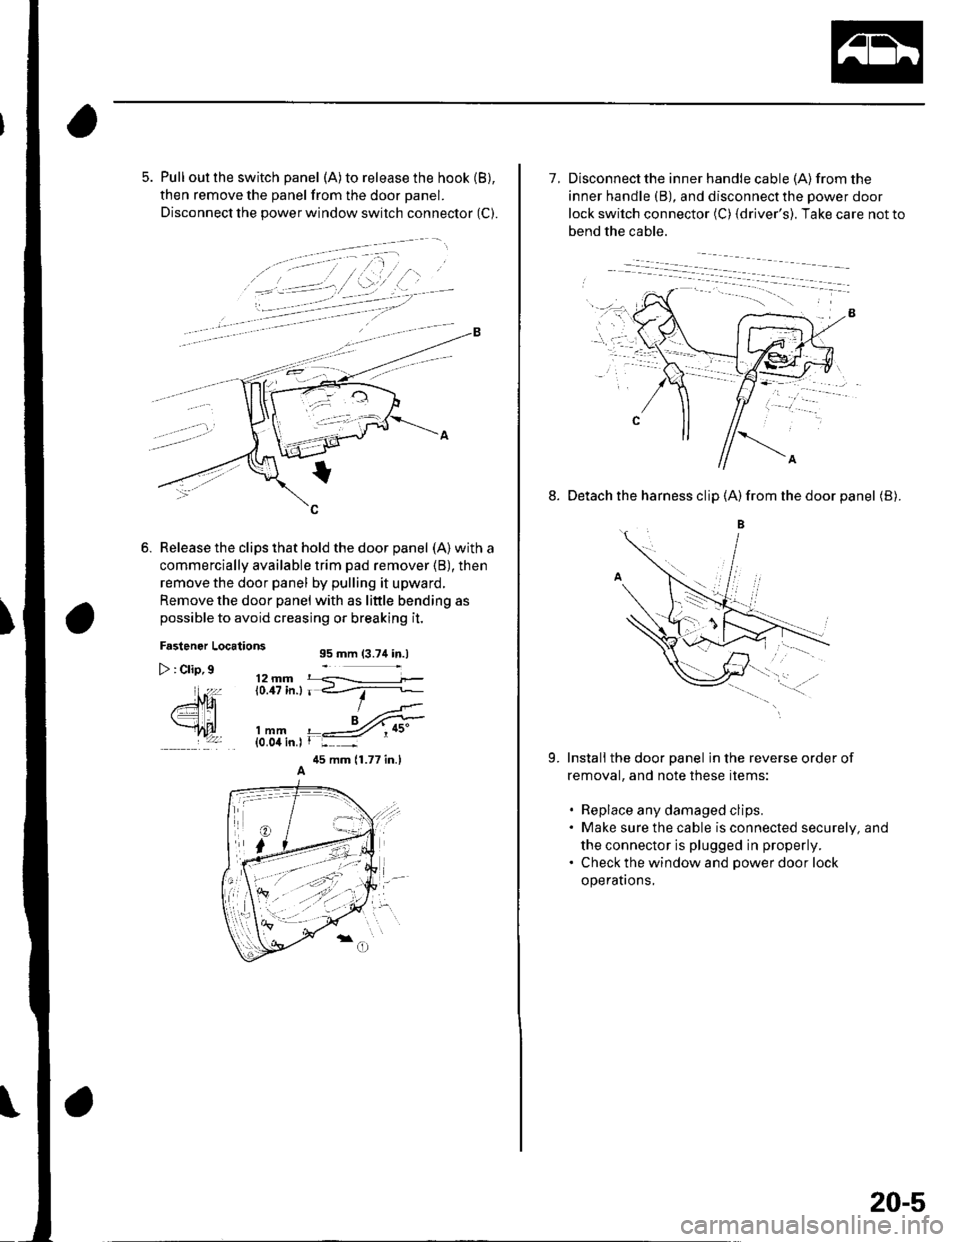 HONDA CIVIC 2003 7.G User Guide 5. Pull out the switch panel (A)to release the hook (B),
then remove the panel from the door panel.
Disconnect the power window switch connector (C).
Release the clips that hold the door panel (A) wit